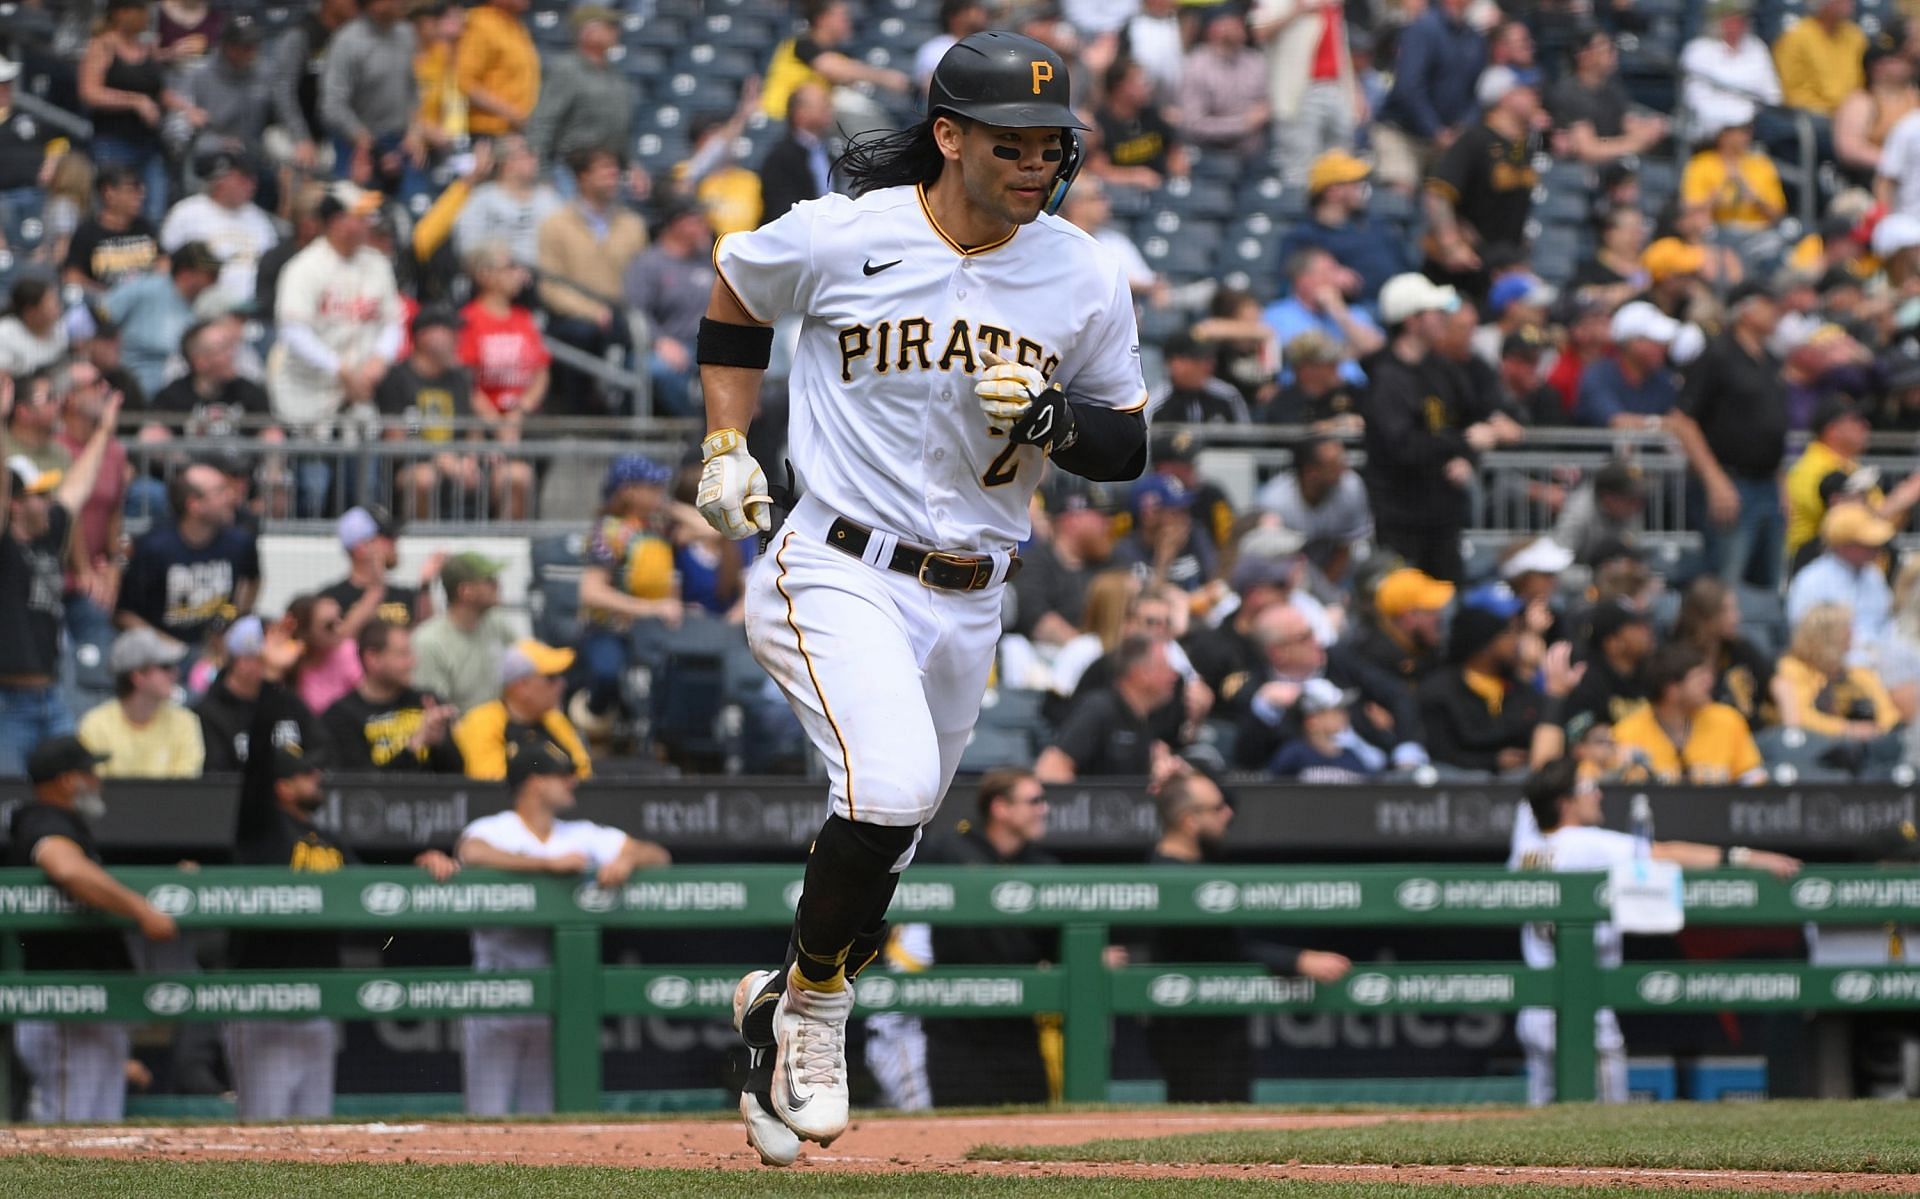 What is Connor Joe's ethnicity? Tracing the culture and family heritage of  Pittsburgh Pirates' star